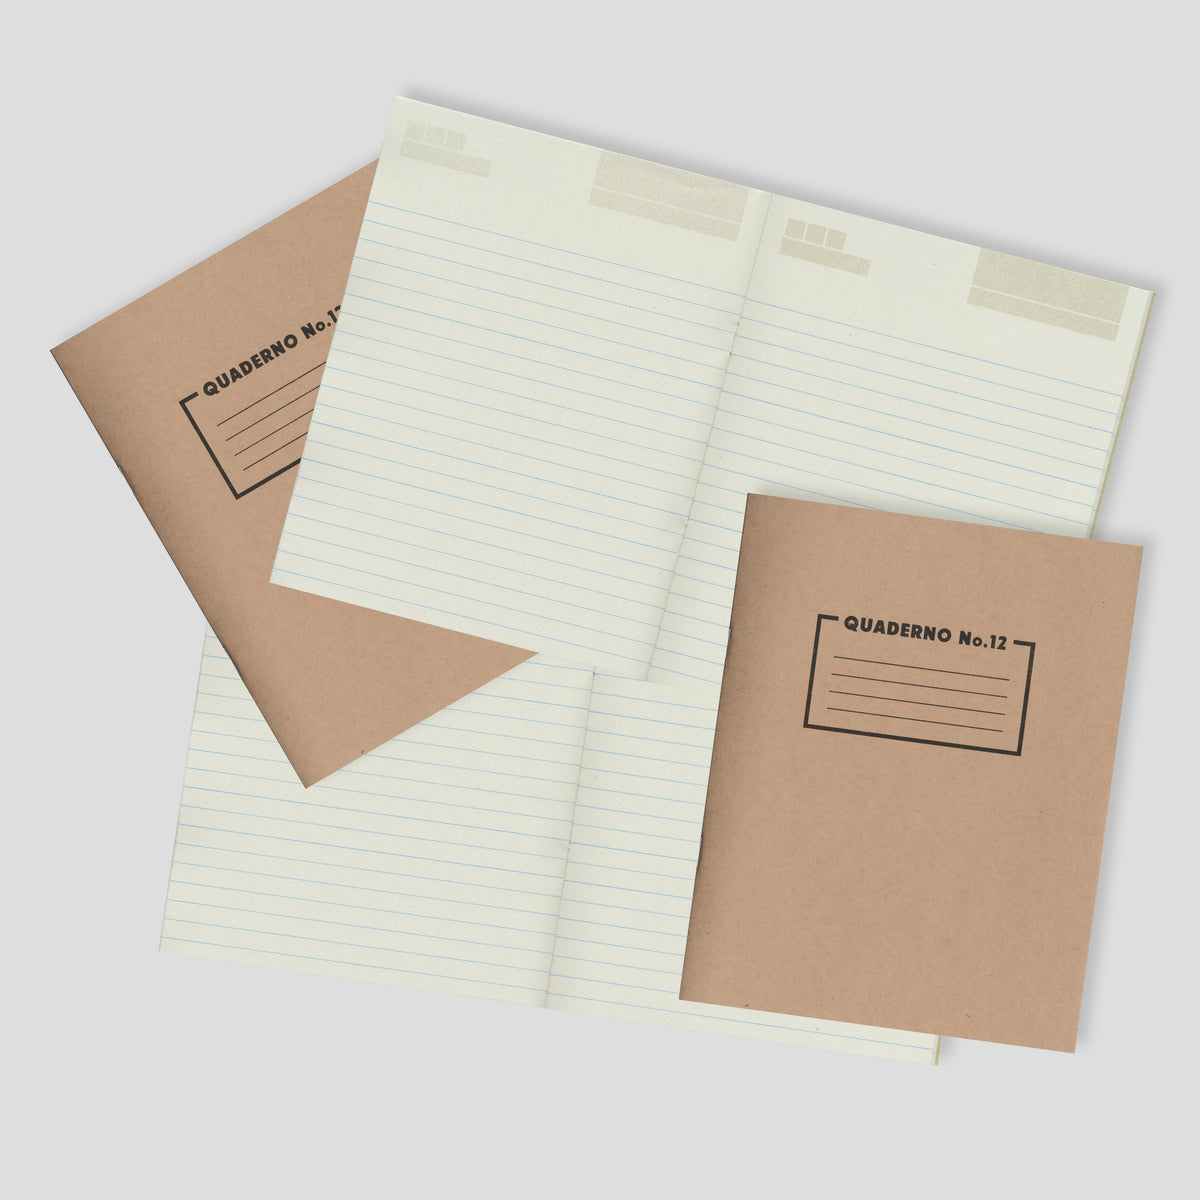 Quaderno No.12 - Ruled Journal Notebook